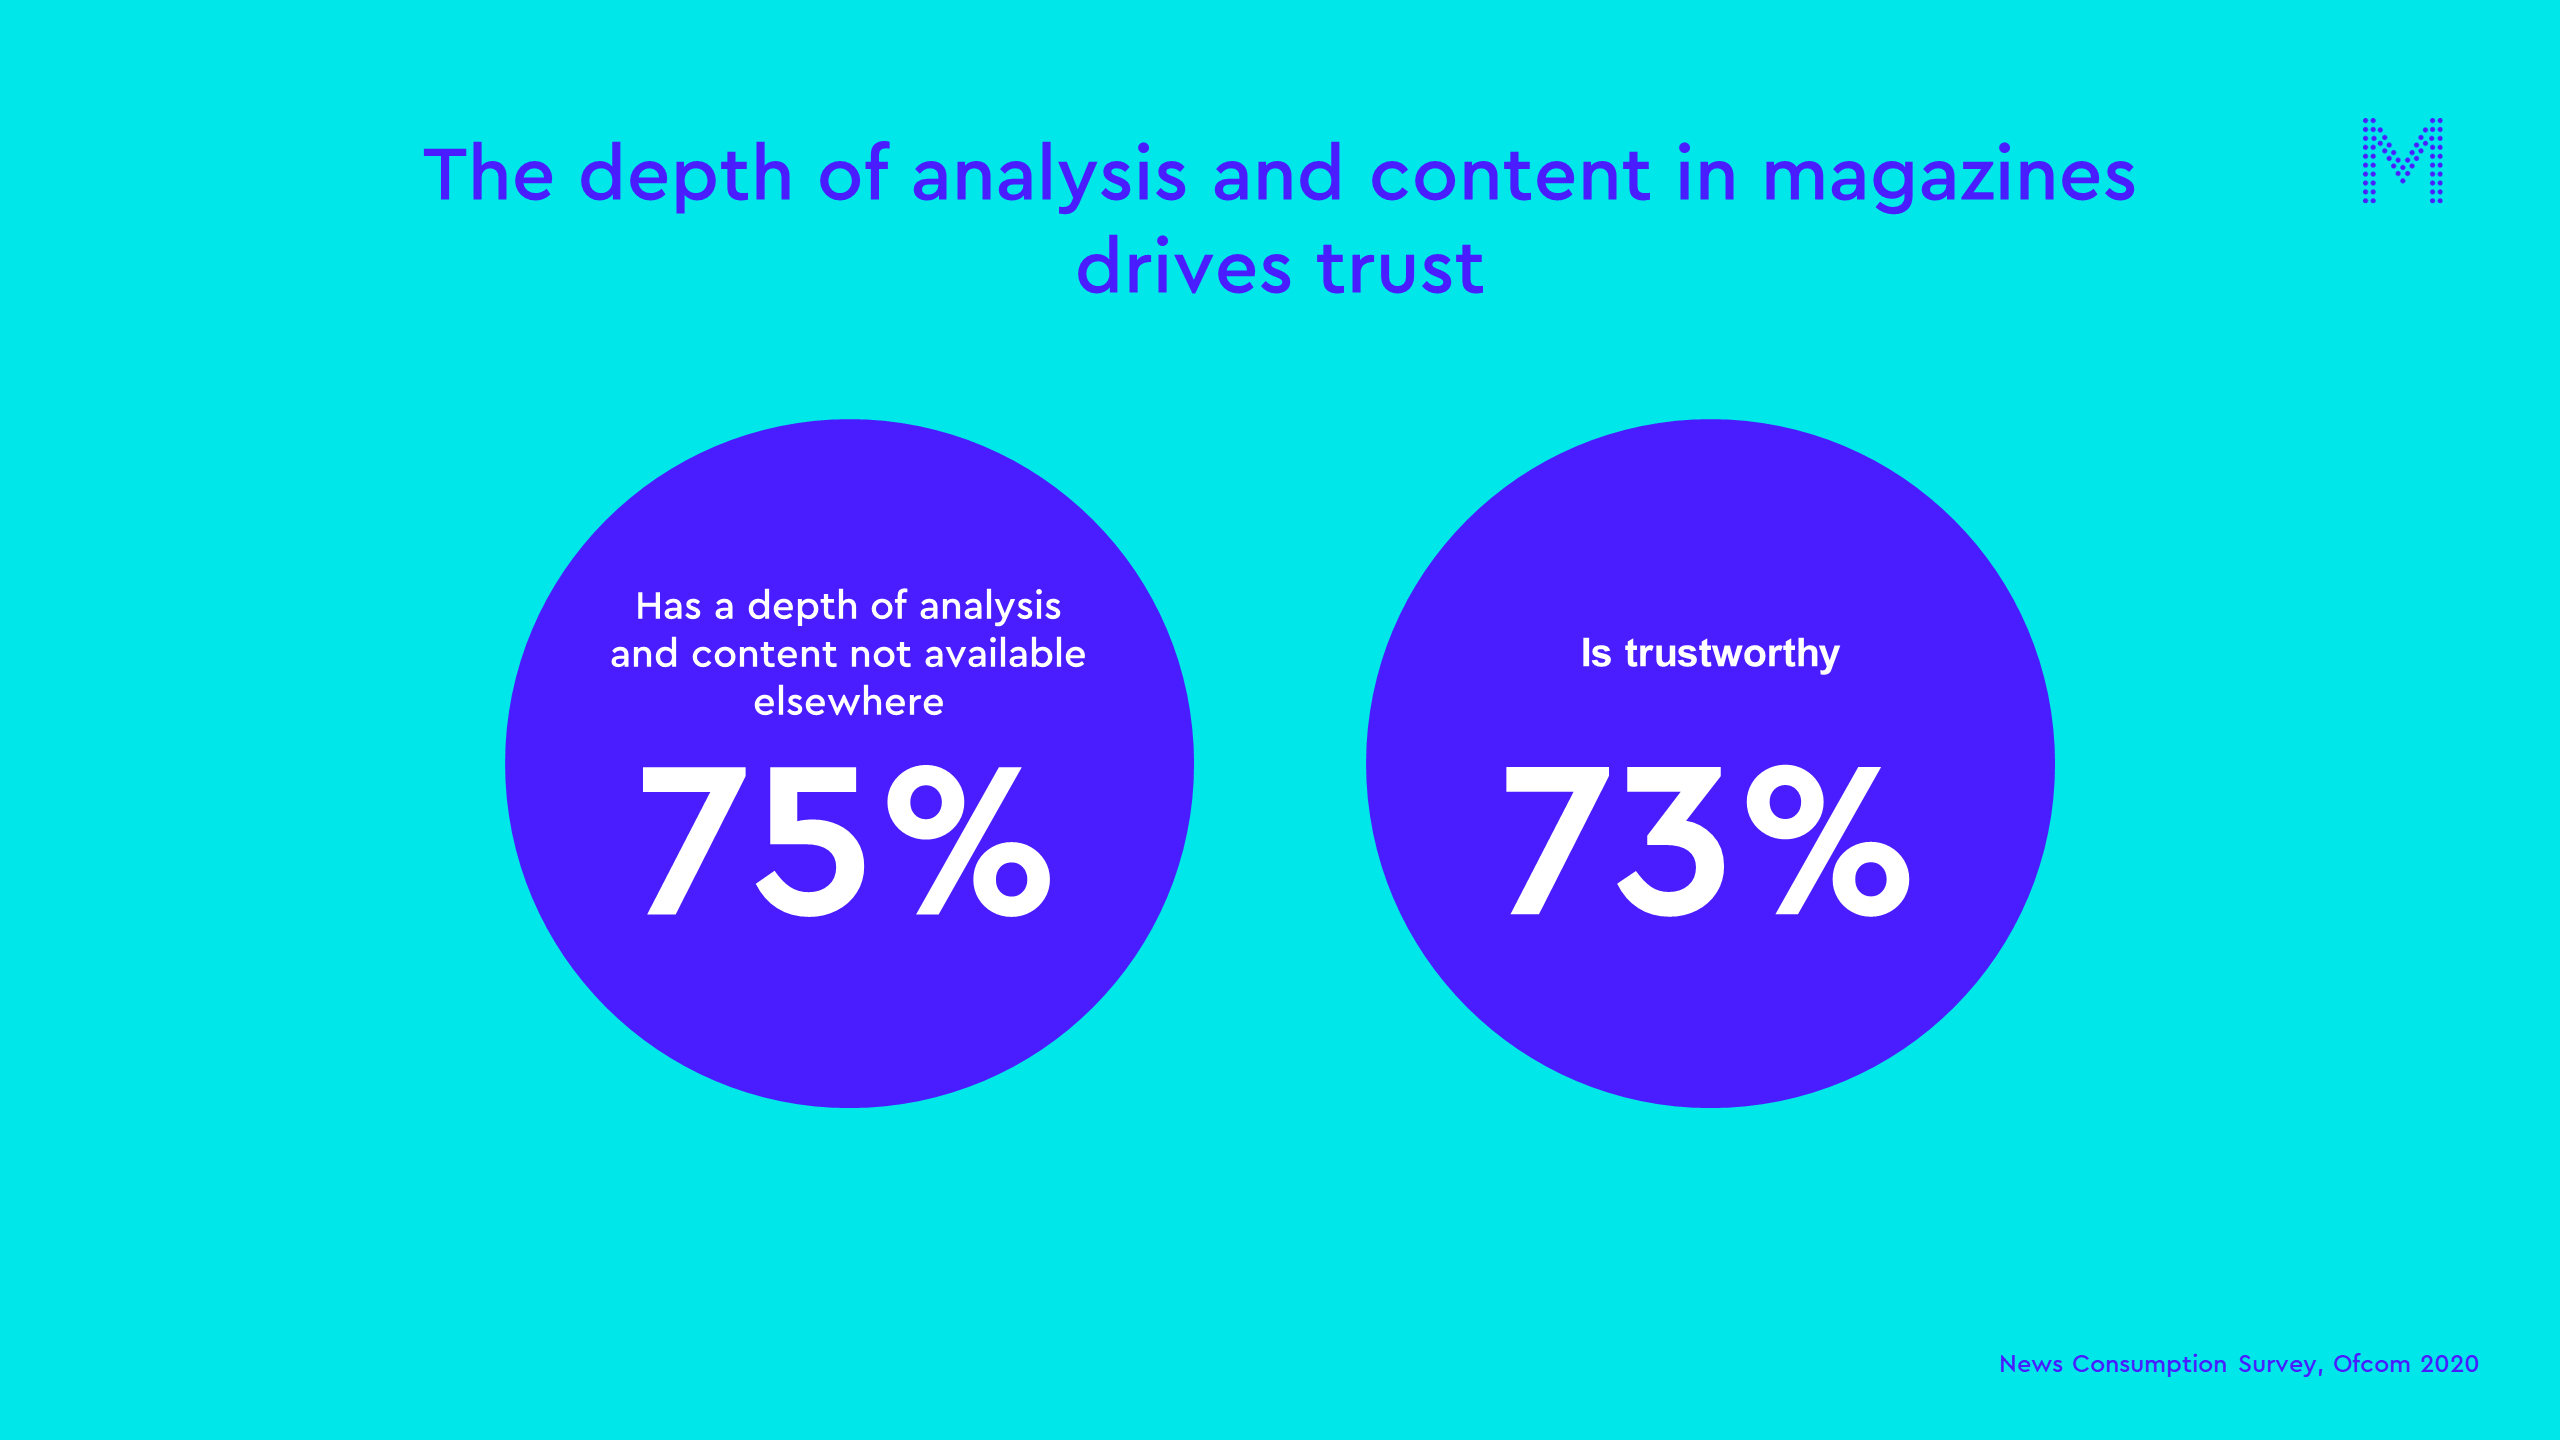 The depth of analysis and content in magazines drives trust